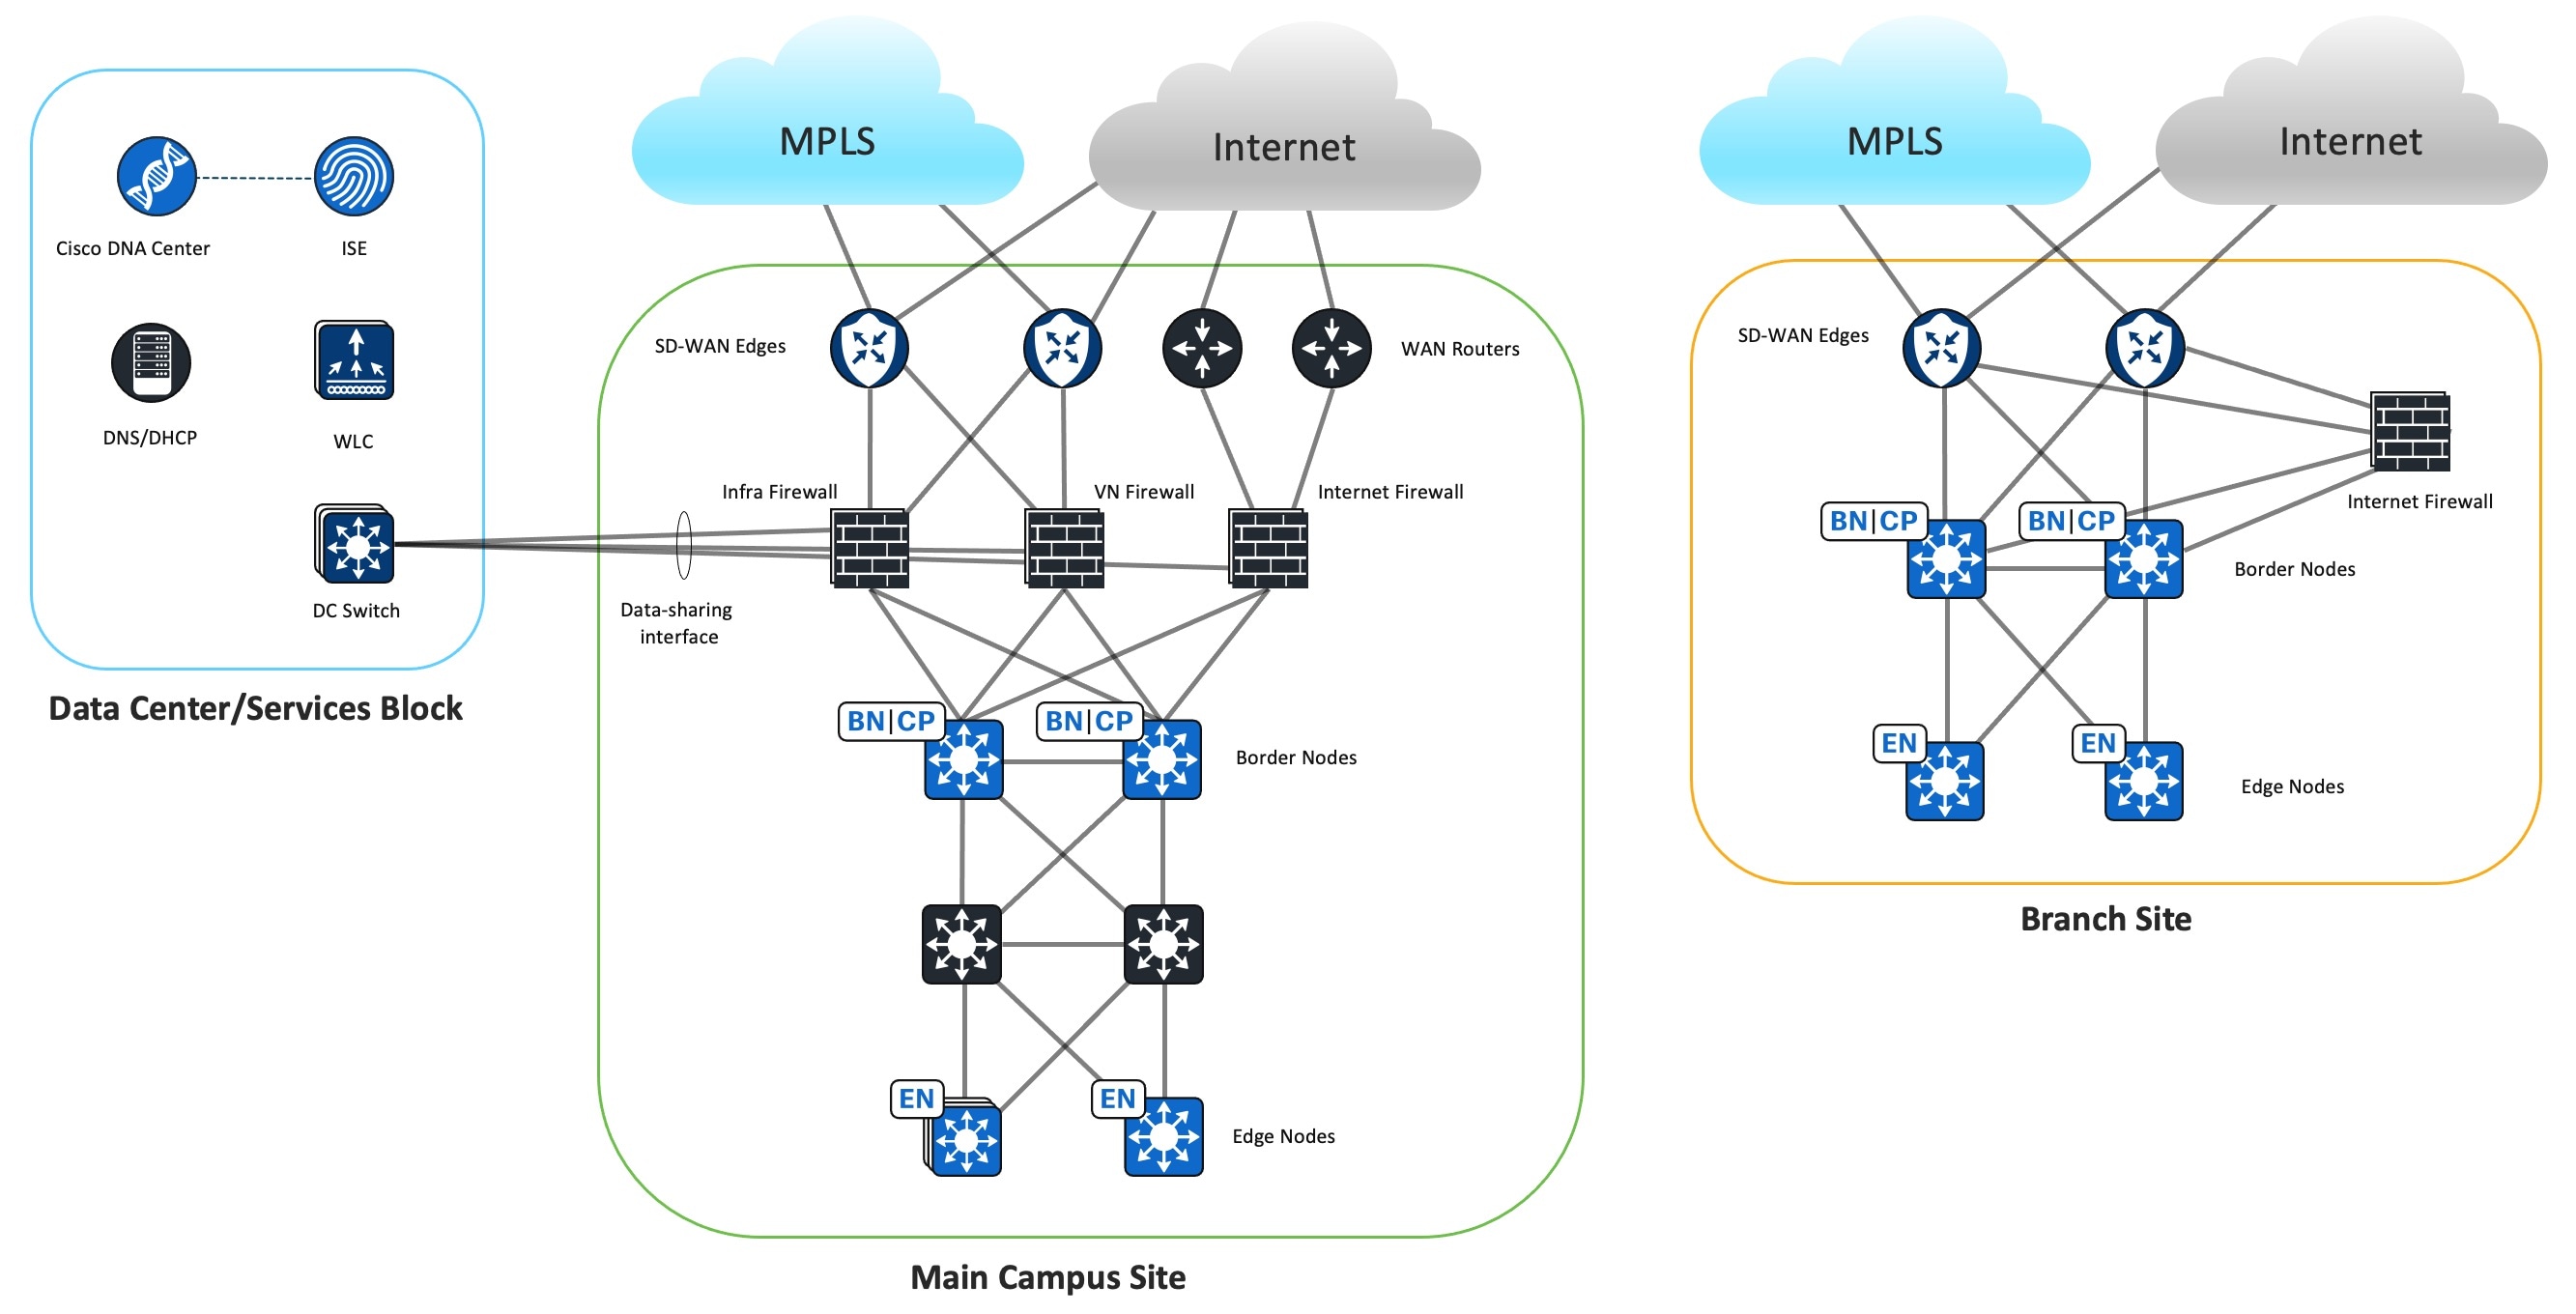 The Main Campus and Branch Site logical diagram displays the main site connected to the data center and the main campus site and branch site connected to the internet and Multiprotocol Label Switching.